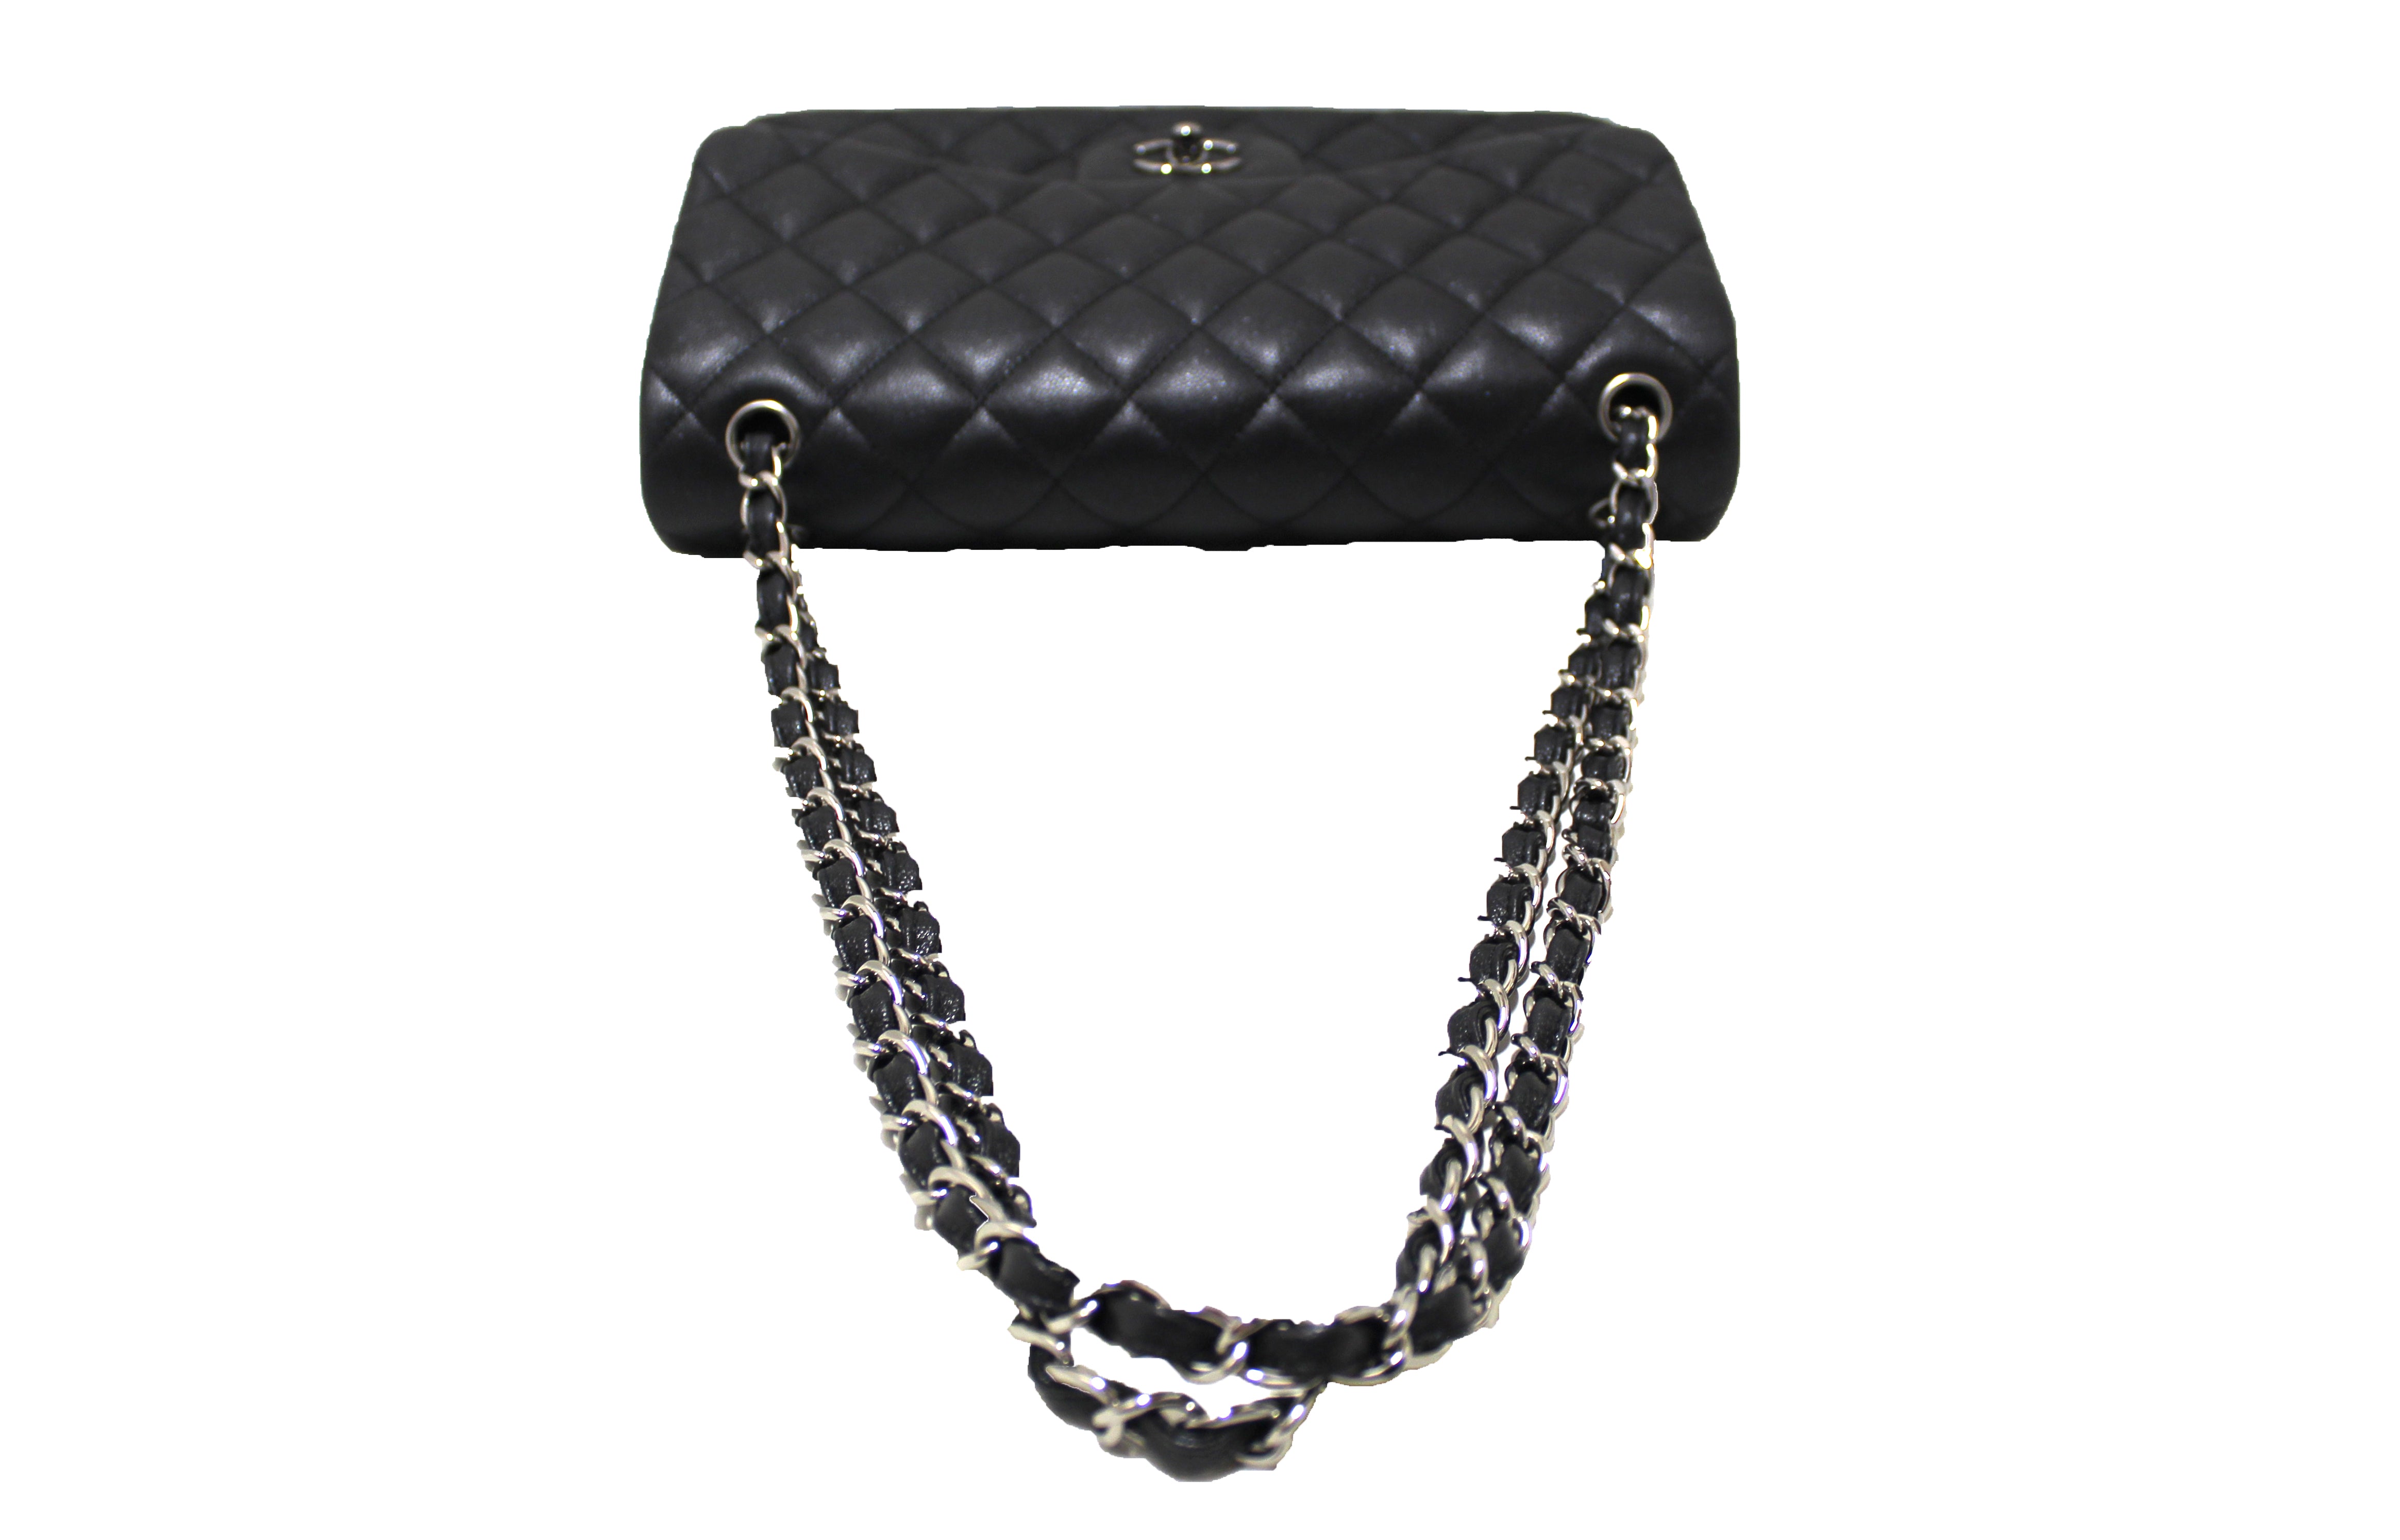 Authentic Chanel Black Iridescent Quilted Caviar Leather Classic Jumbo Double Flap Bag